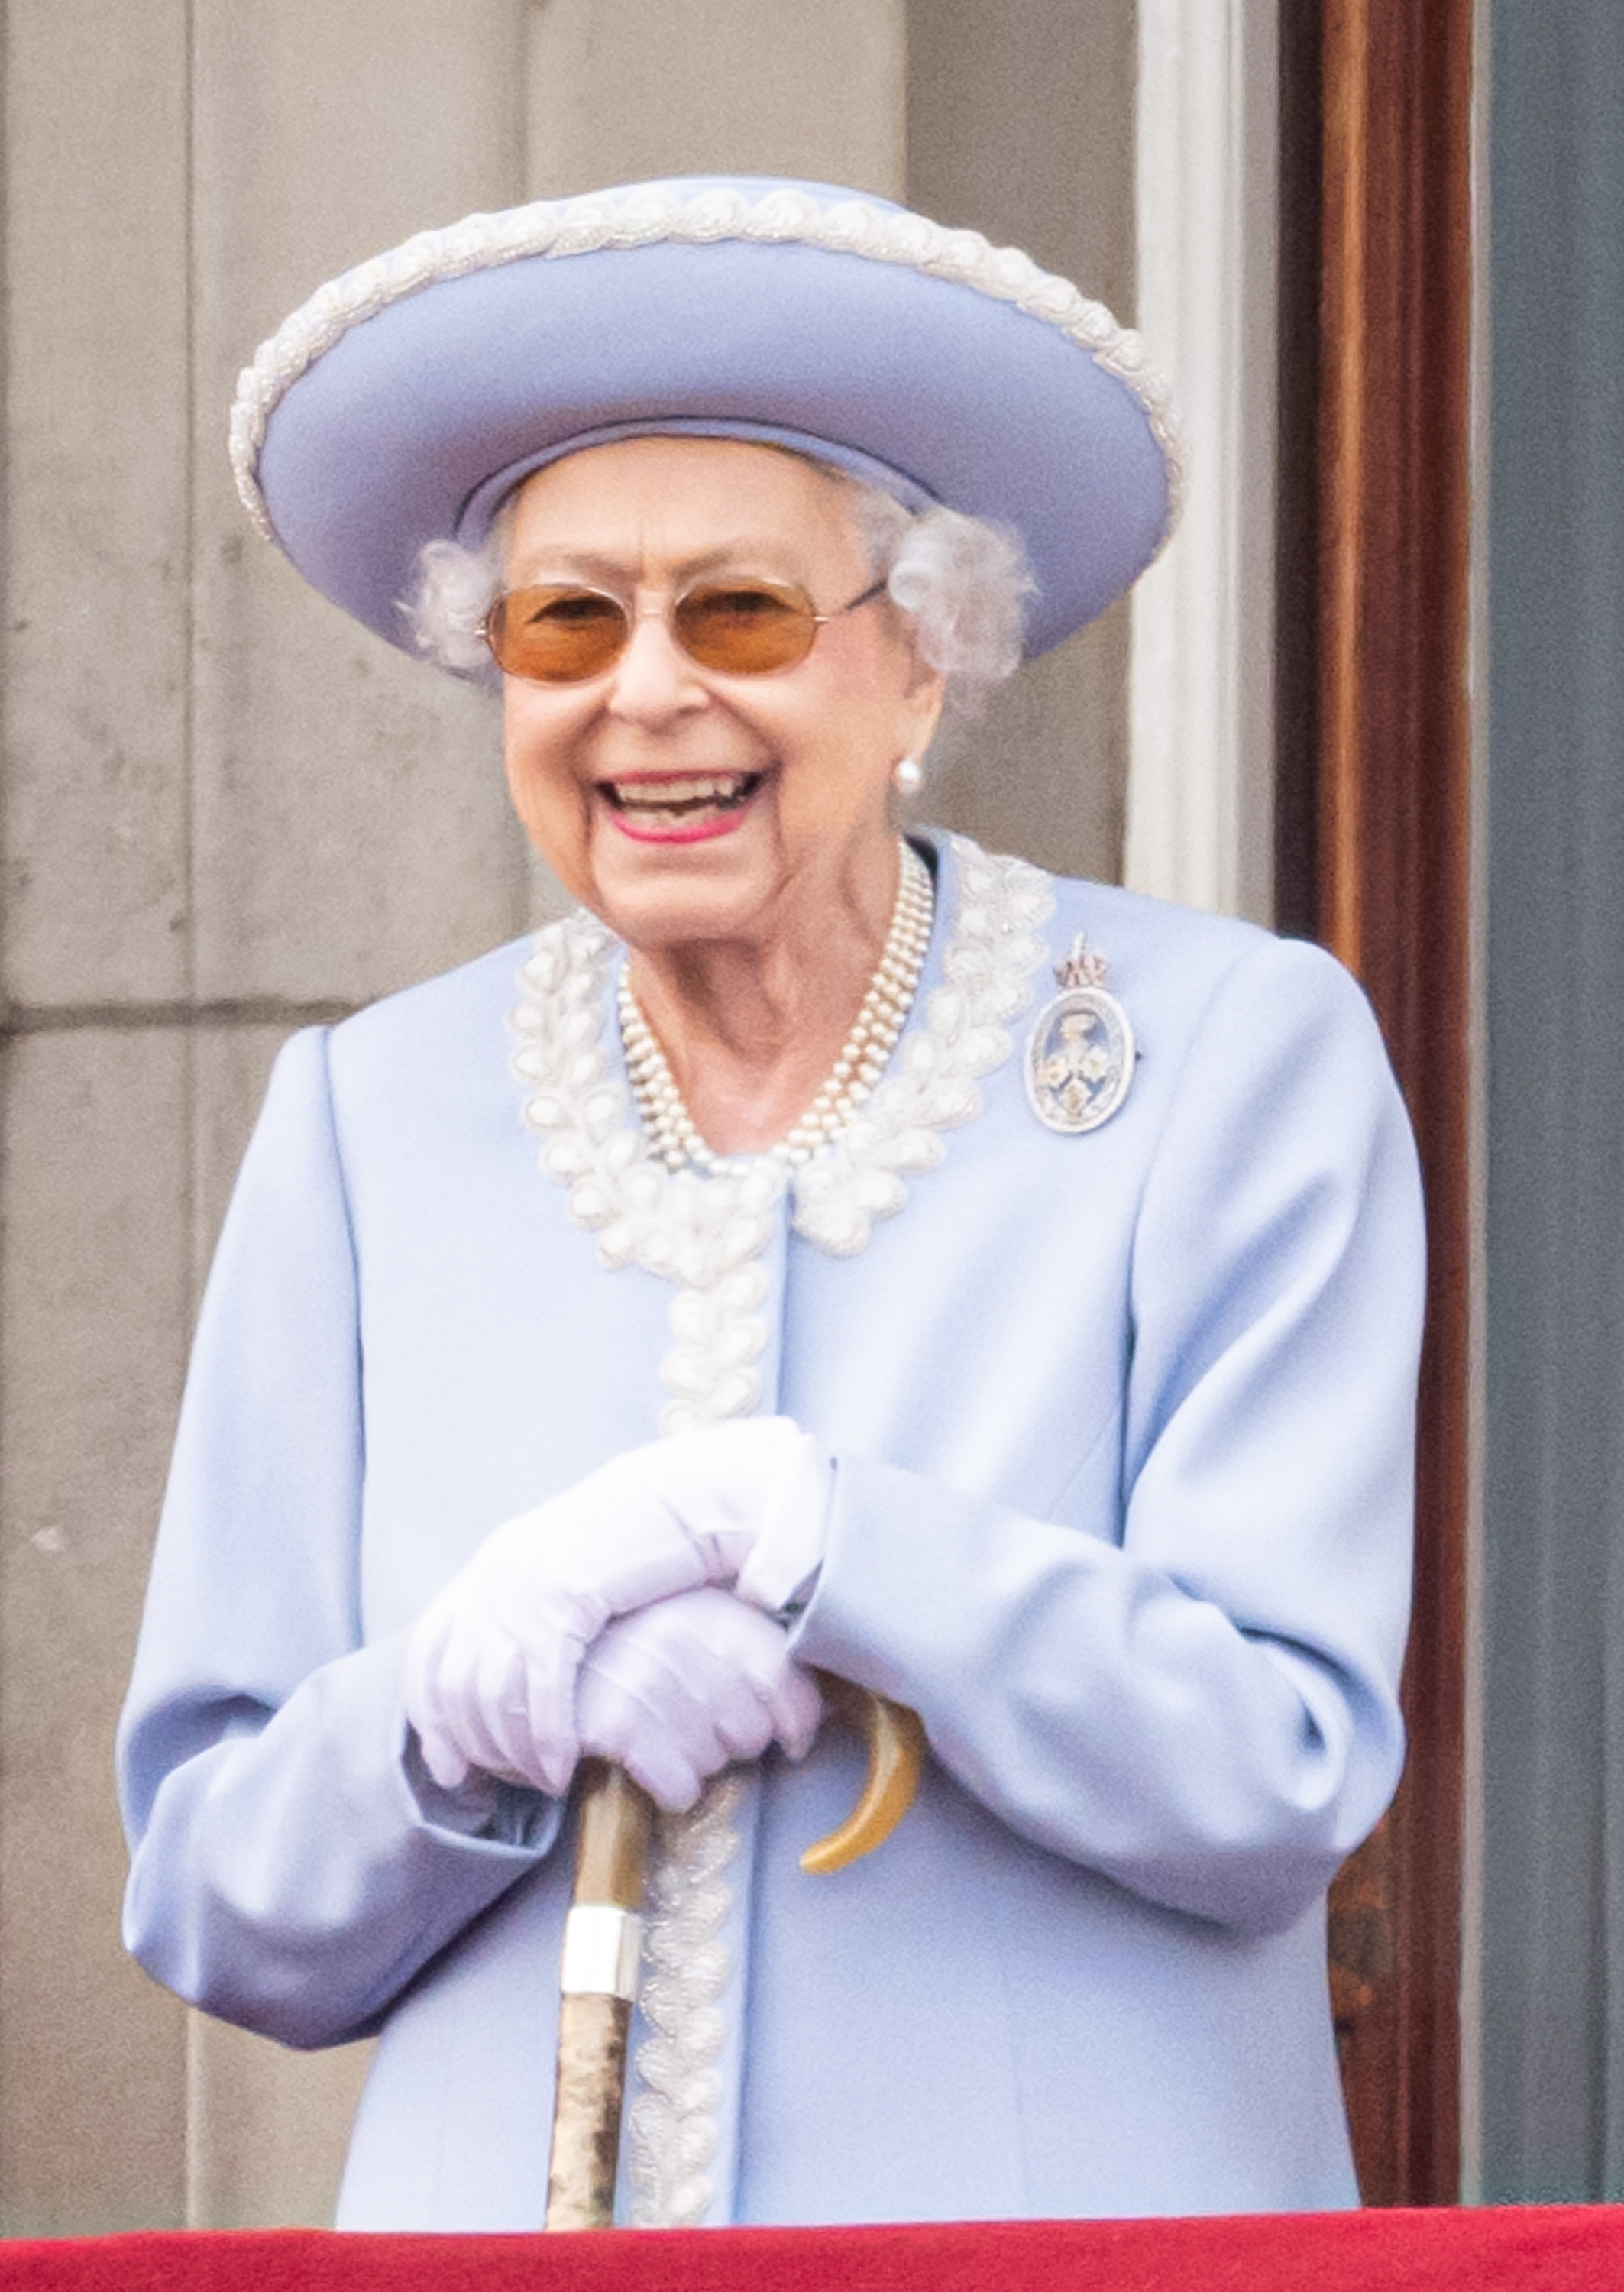 Queen Elizabeth smiling in the same spot where the previous pictures of William and Kate were taken